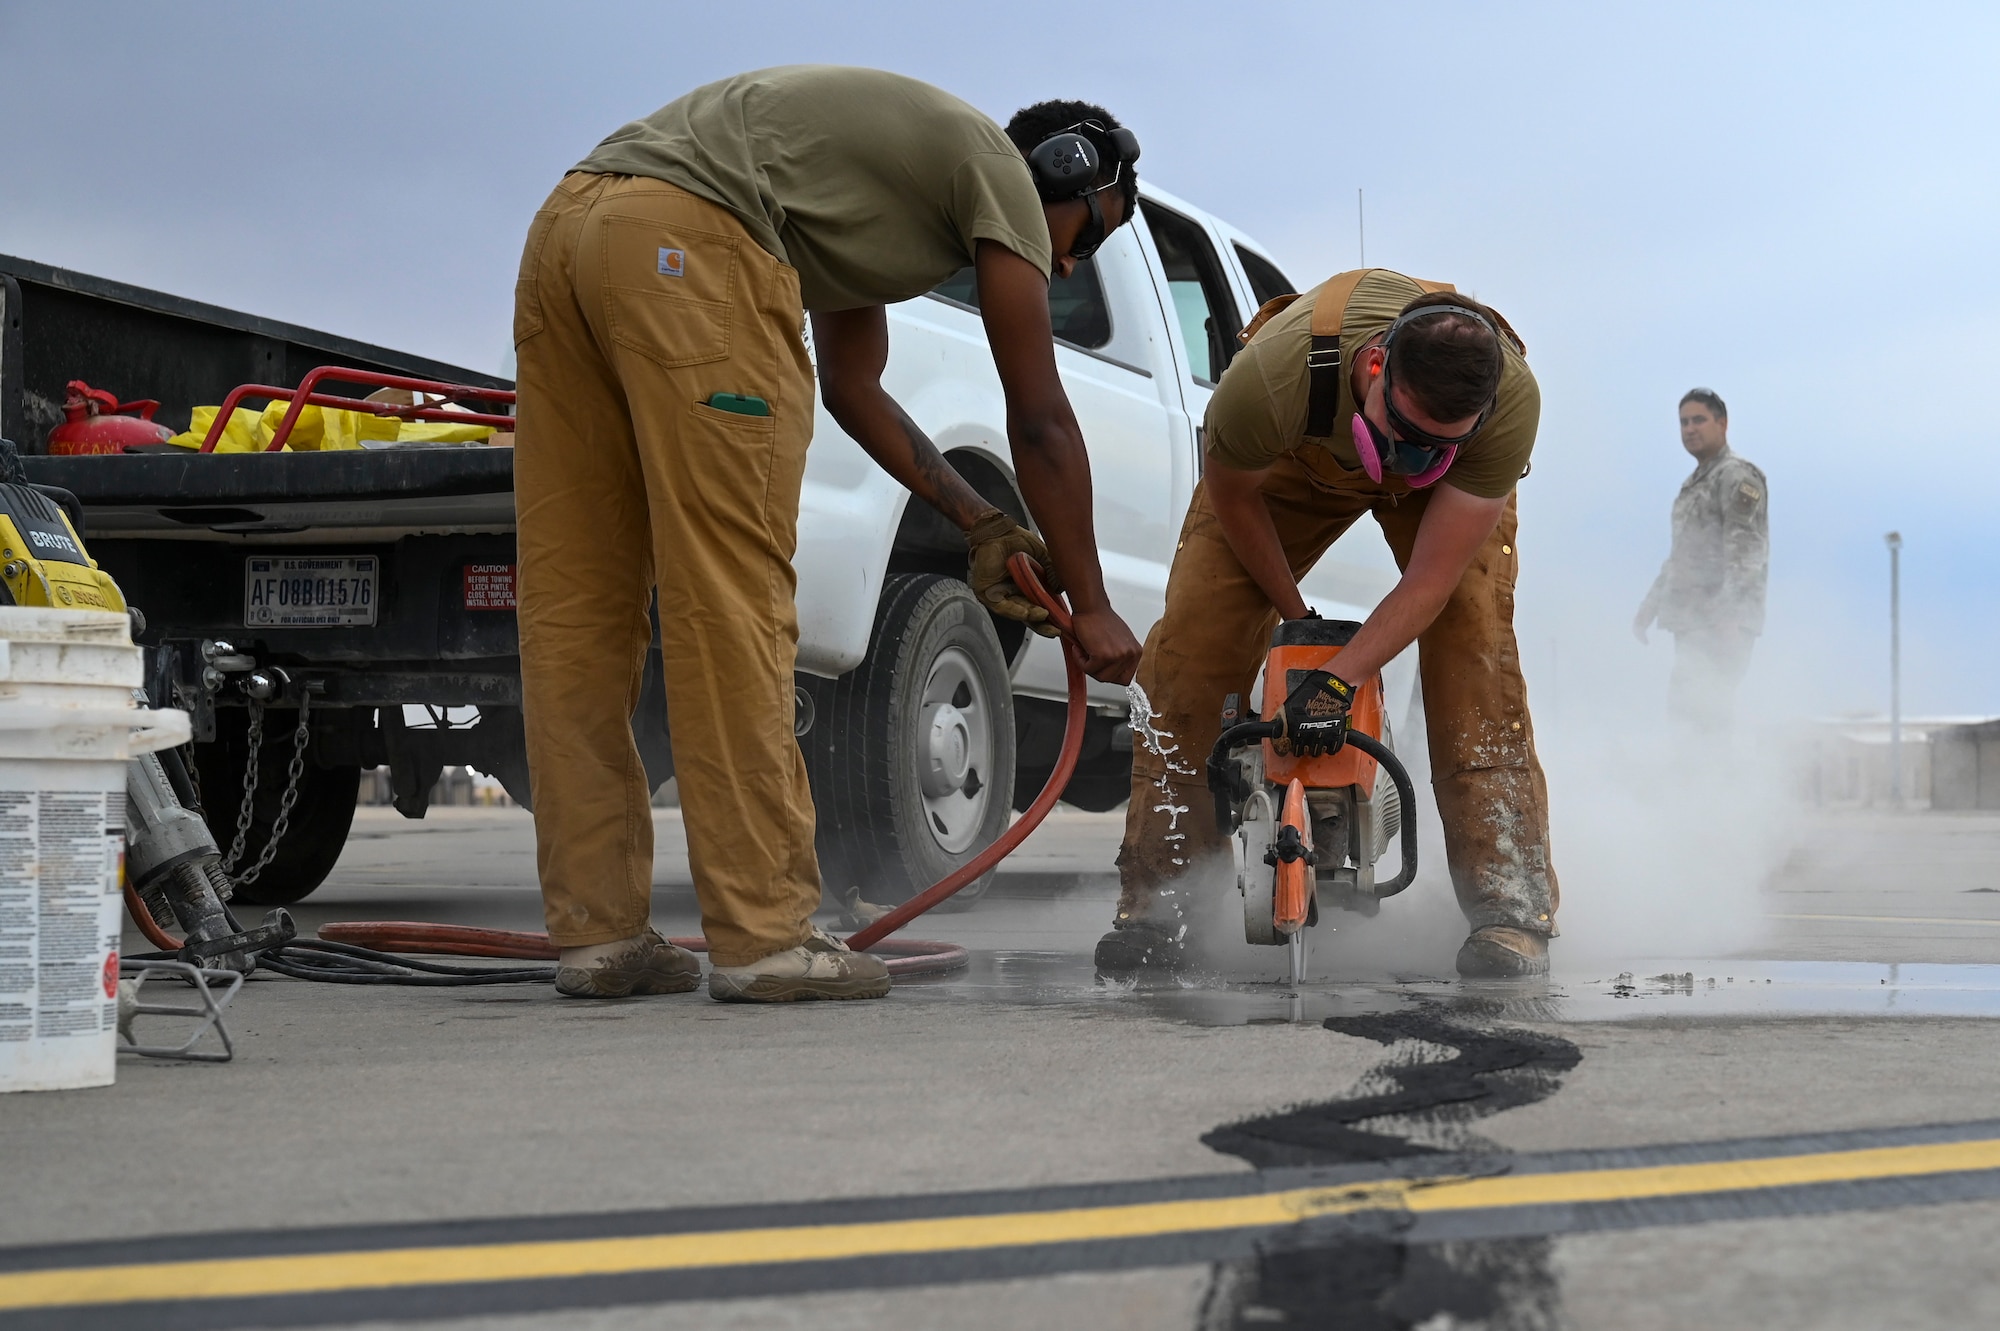 U.S. Air Force Senior Airman Jacquez Craddieth, left, and Senior Airman Eric Wheeler, 49th Civil Engineer Squadron pavement and construction equipment journeymen, utilize a K-12 concrete saw to repair a runway at Holloman Air Force Base, New Mexico, June 30, 2023. The 49th CES “Dirt Boyz” Airmen are responsible for maintaining Holloman’s infrastructure by using a variety of tools to complete construction projects. (U.S. Air Force photo by Airman 1st Class Michelle Ferrari)